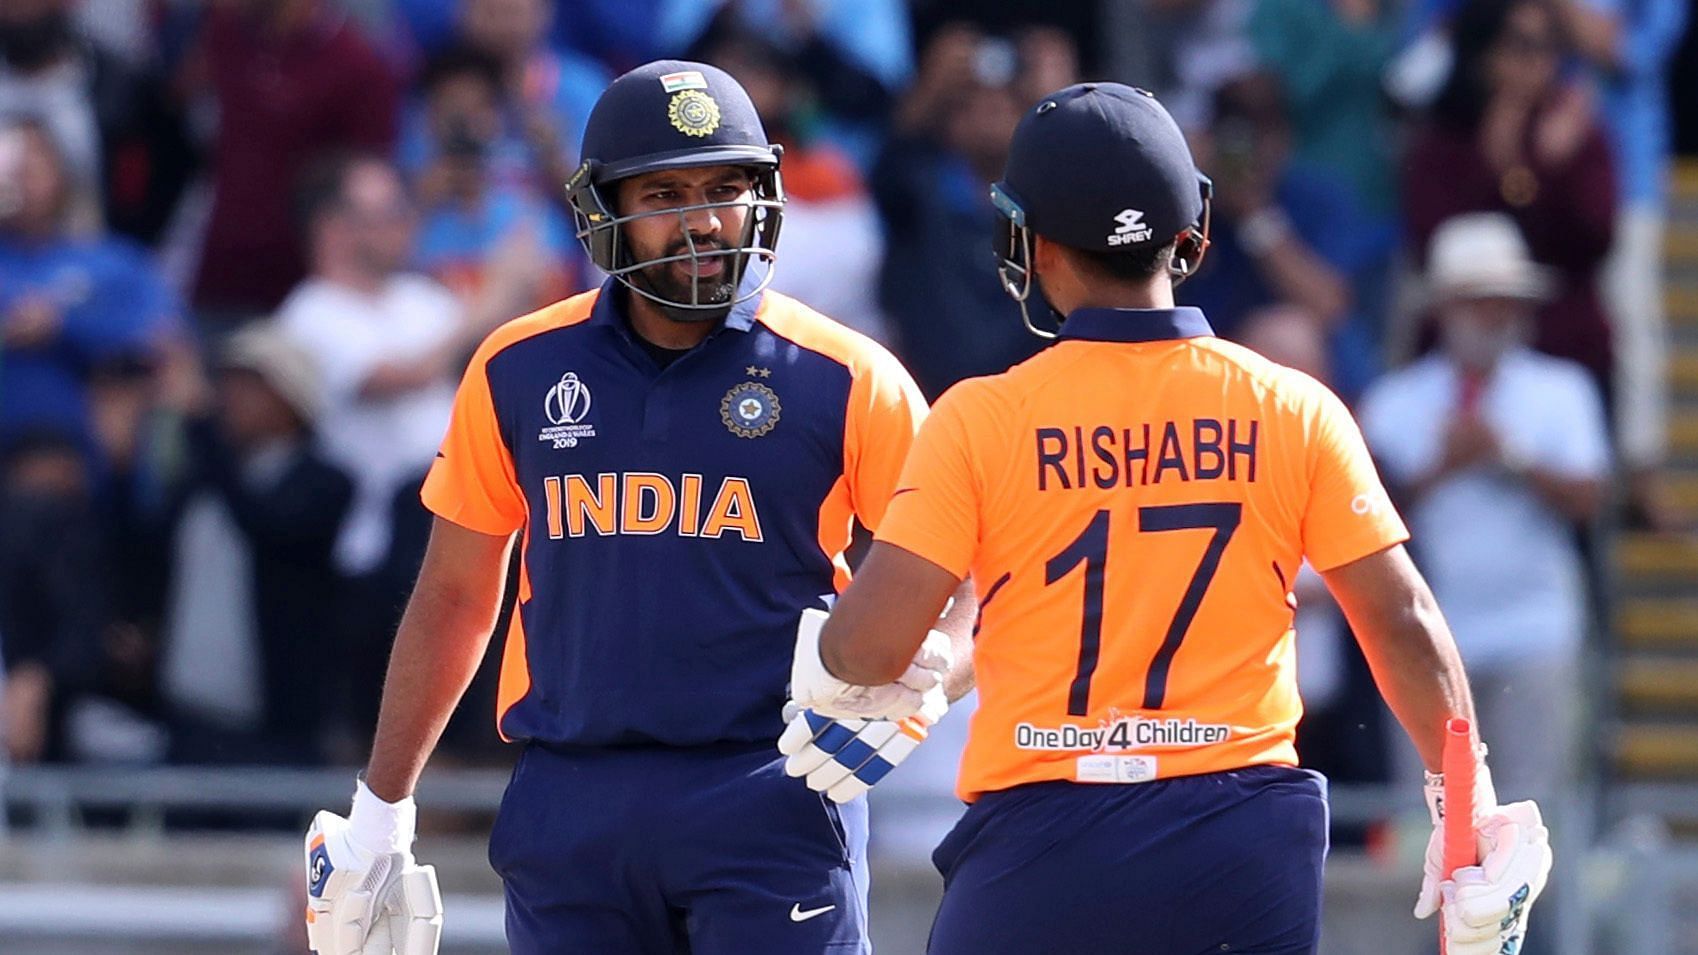 In the post-match press-conference, Indian vice-captain Rohit Sharma was asked if he felt surprised by Pant coming in at number four.